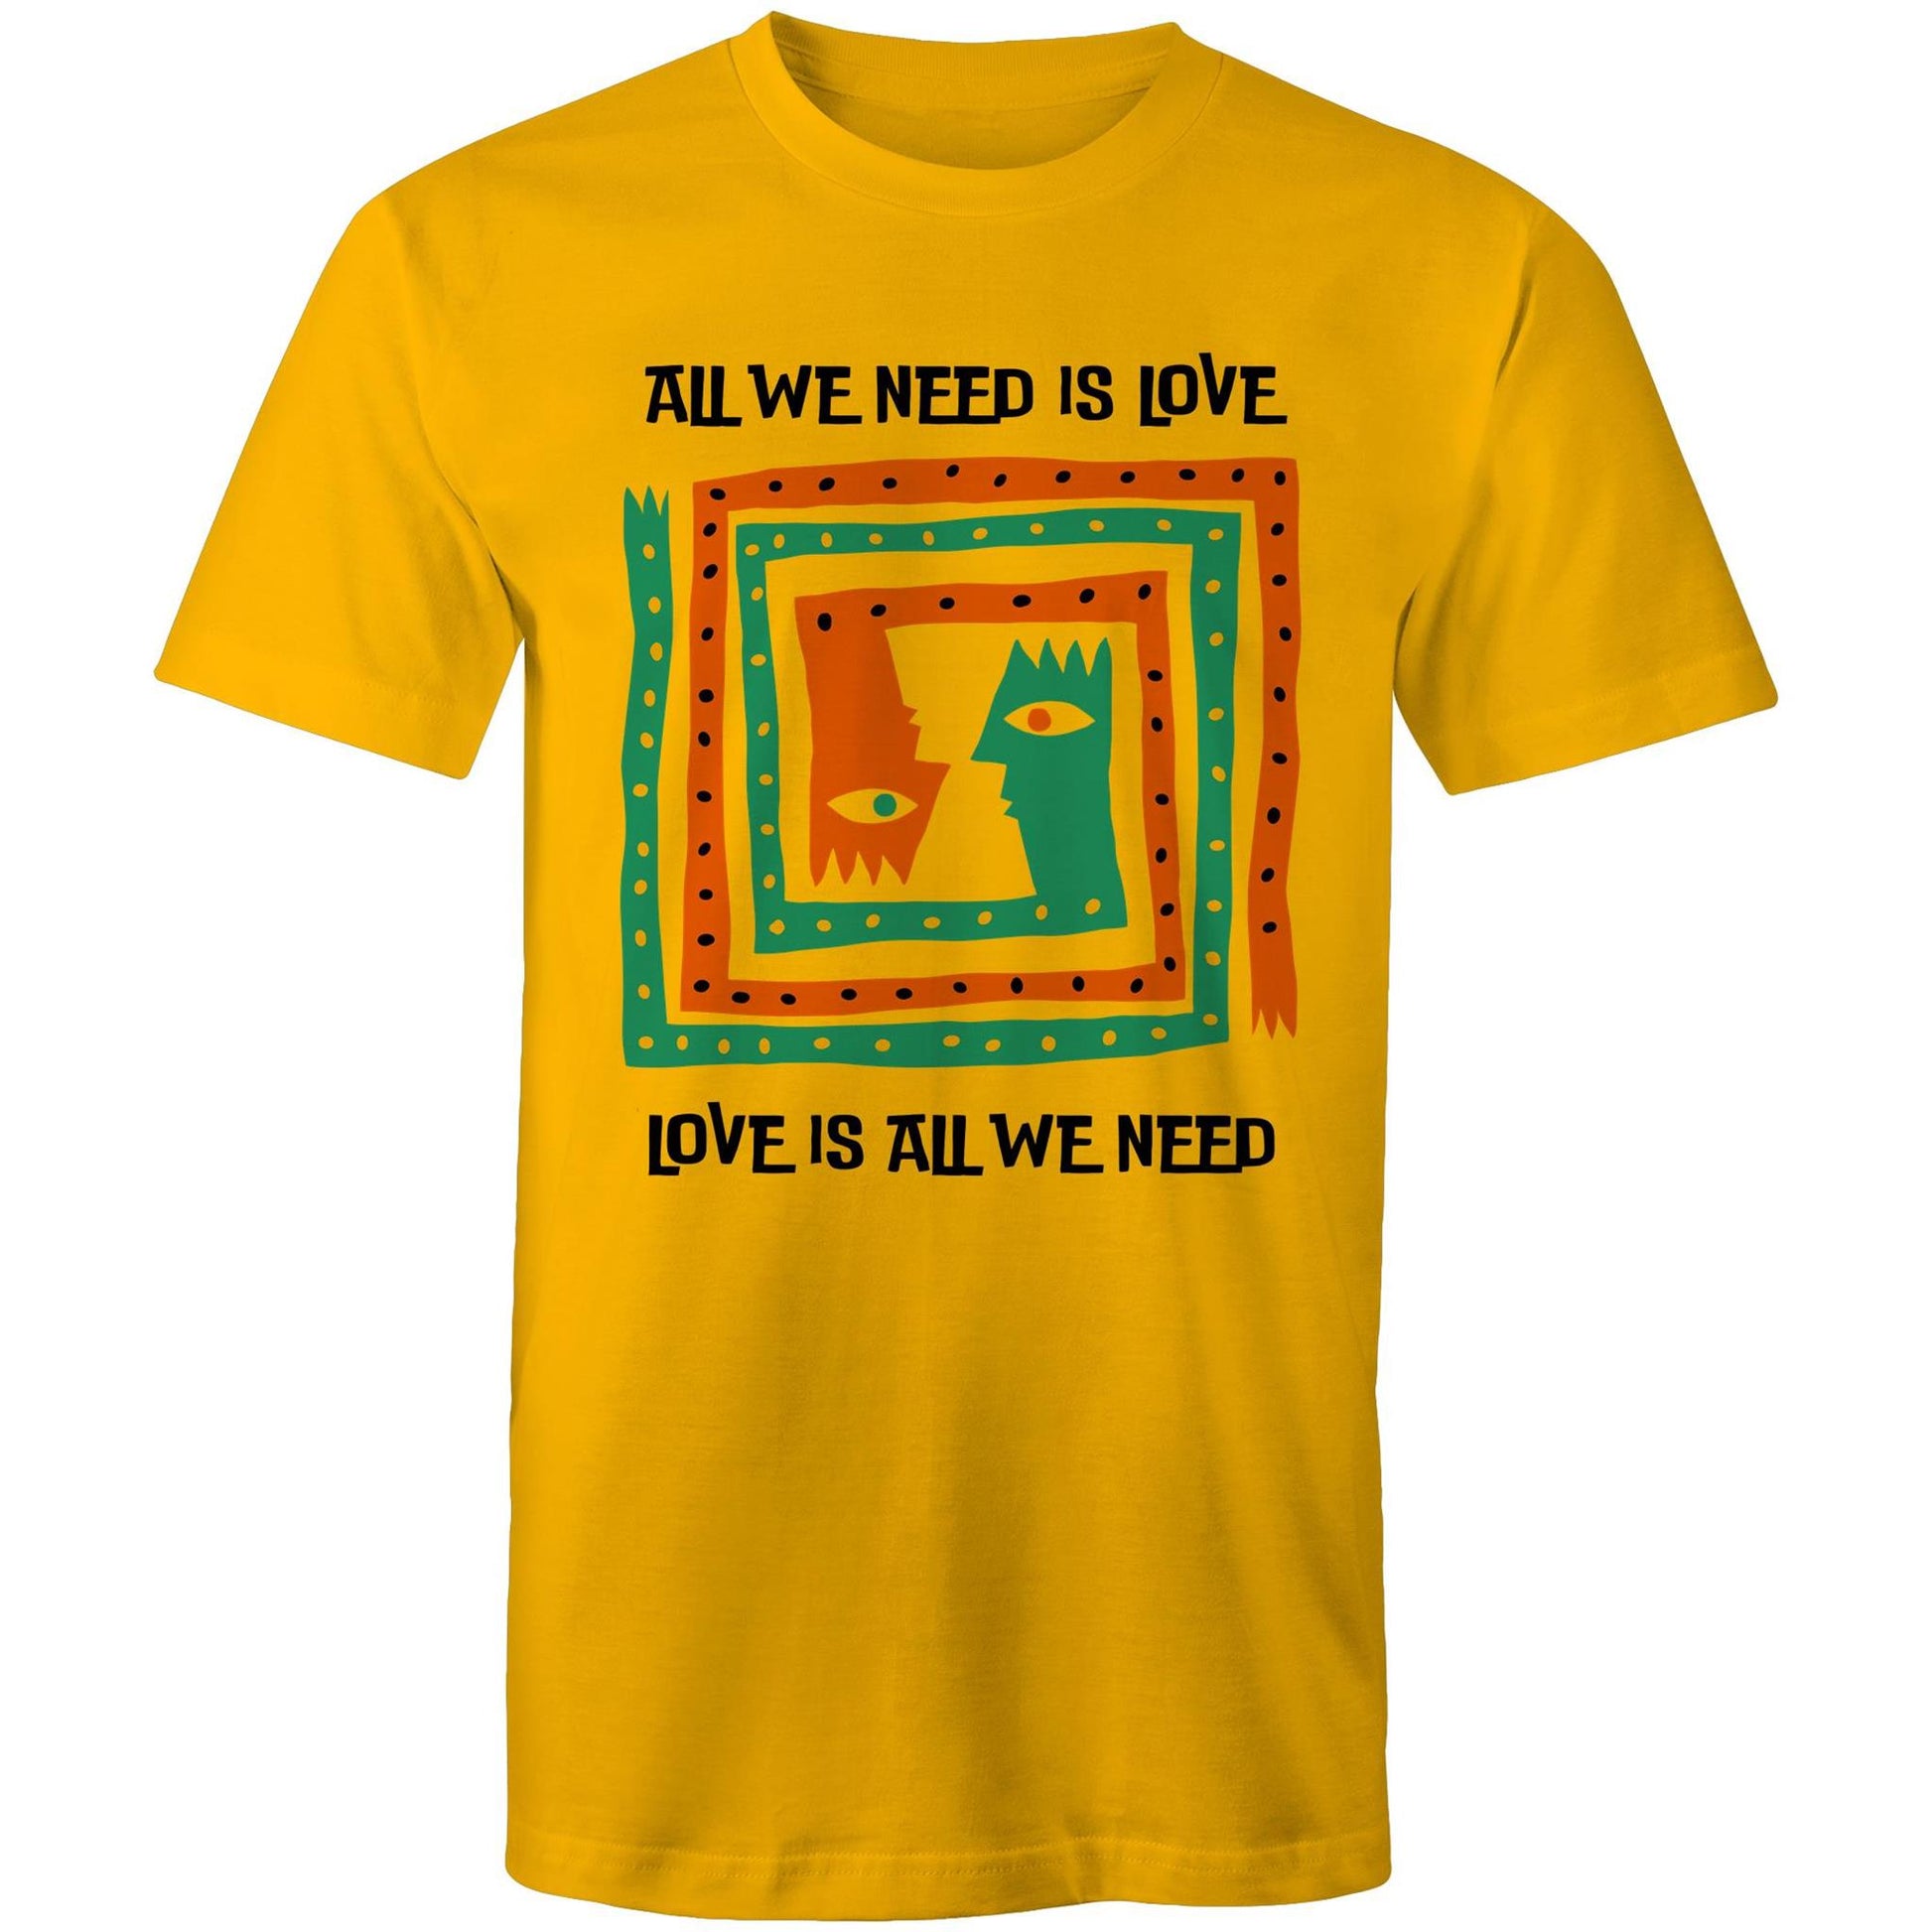 All We Need Is Love - Mens T-Shirt Gold Mens T-shirt